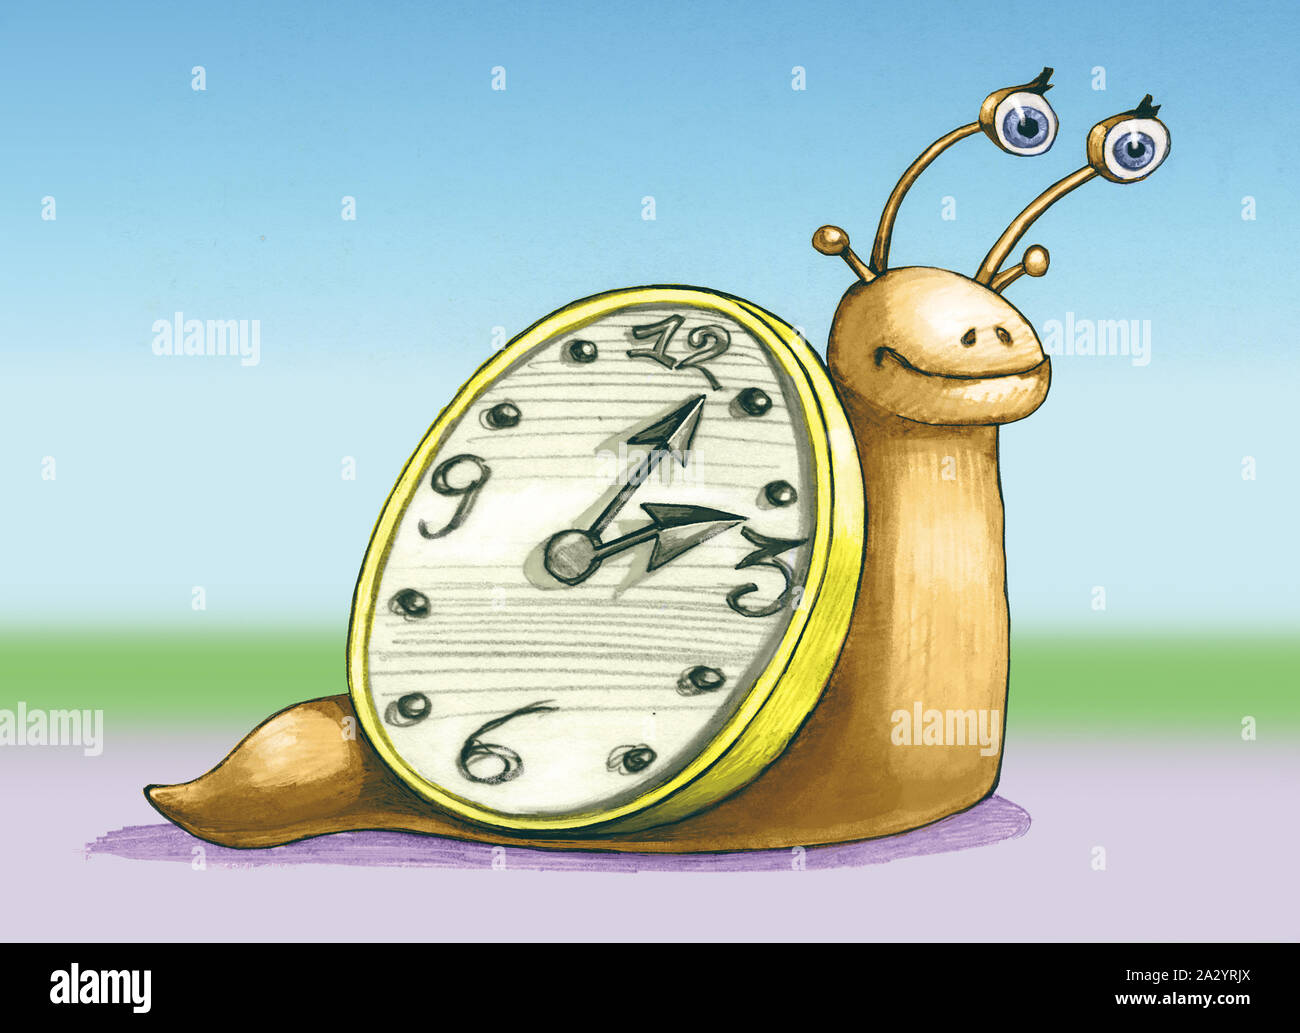 snail with clock instead of shell Stock Photo - Alamy